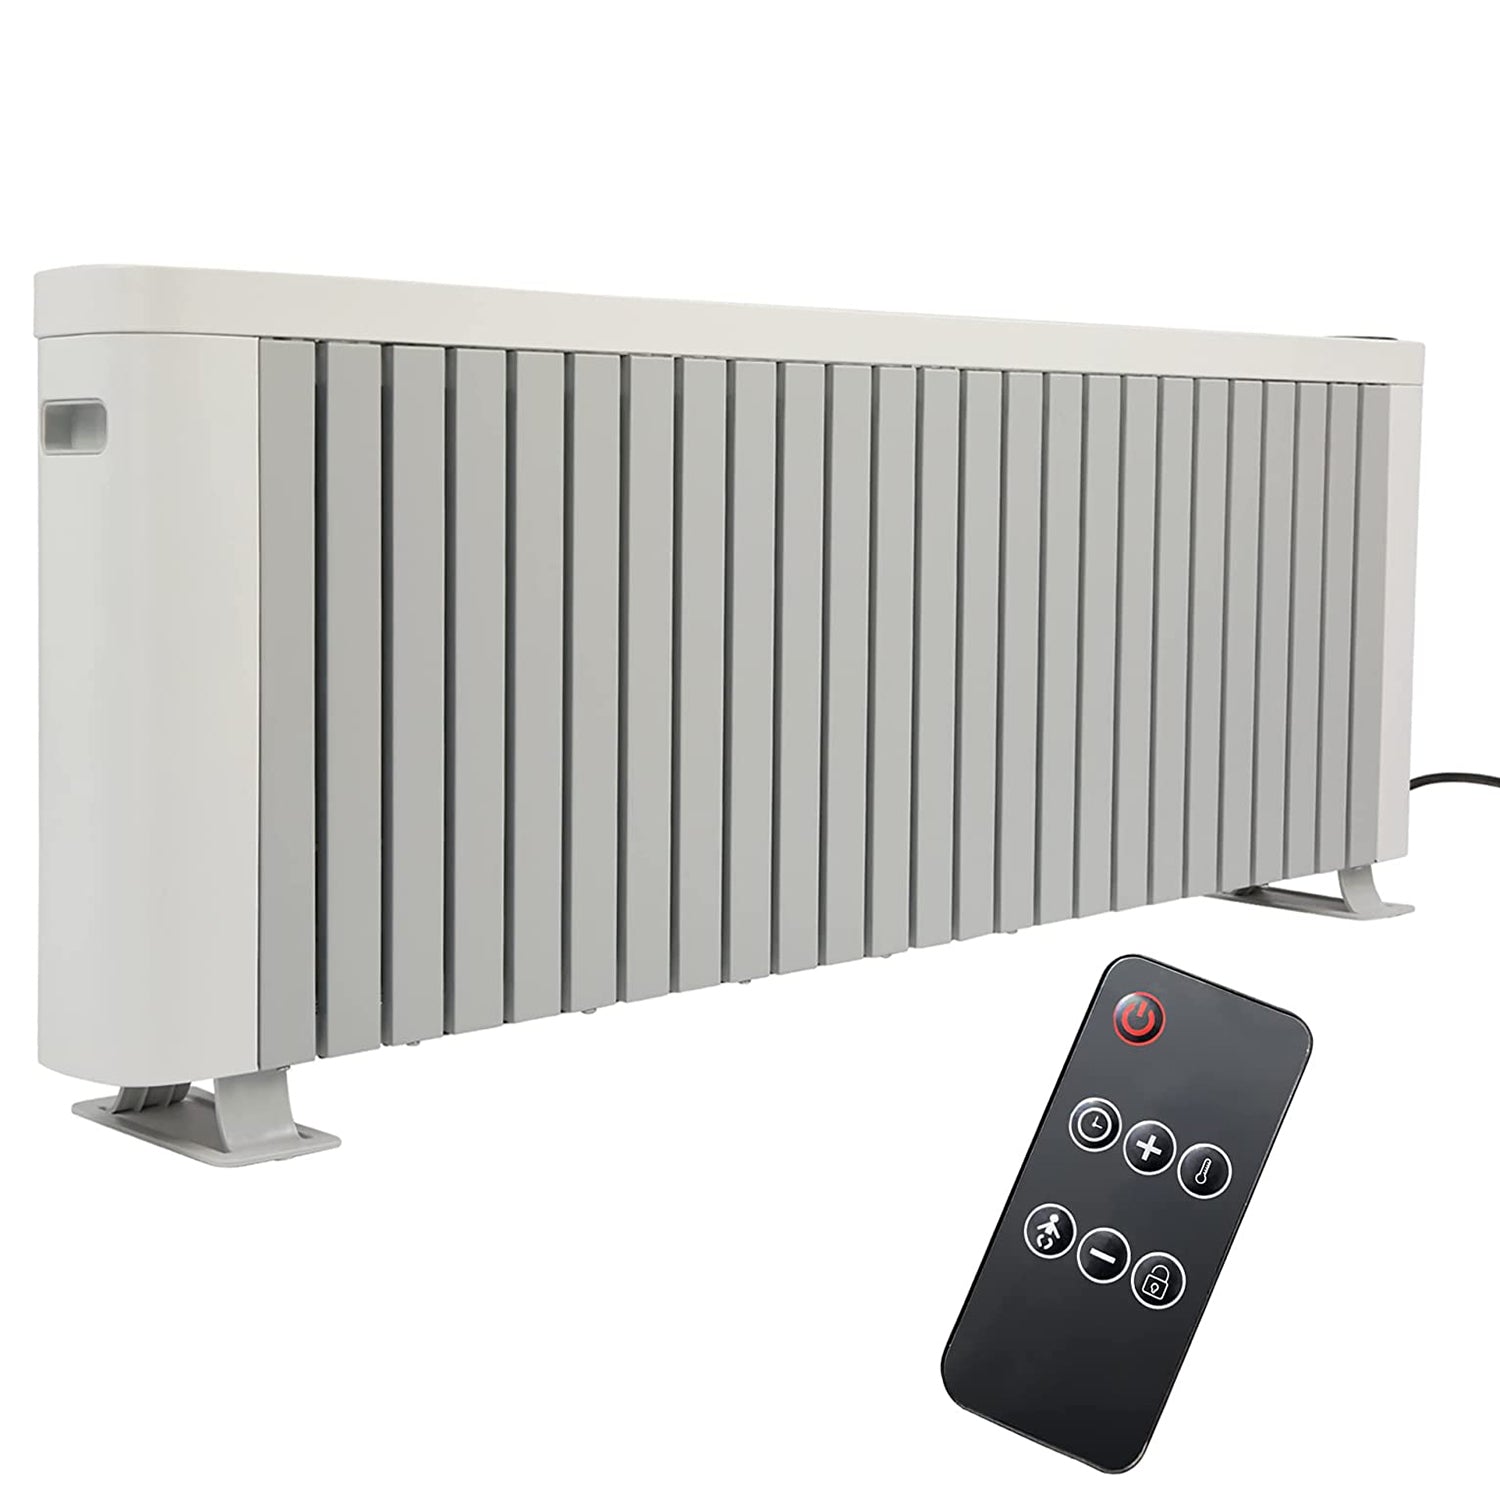 BOSONSHOP Efficient 1500W Baseboard Electric Heater, Silent Convection Heating, Remote Lock, LED Display, Multi-Protection